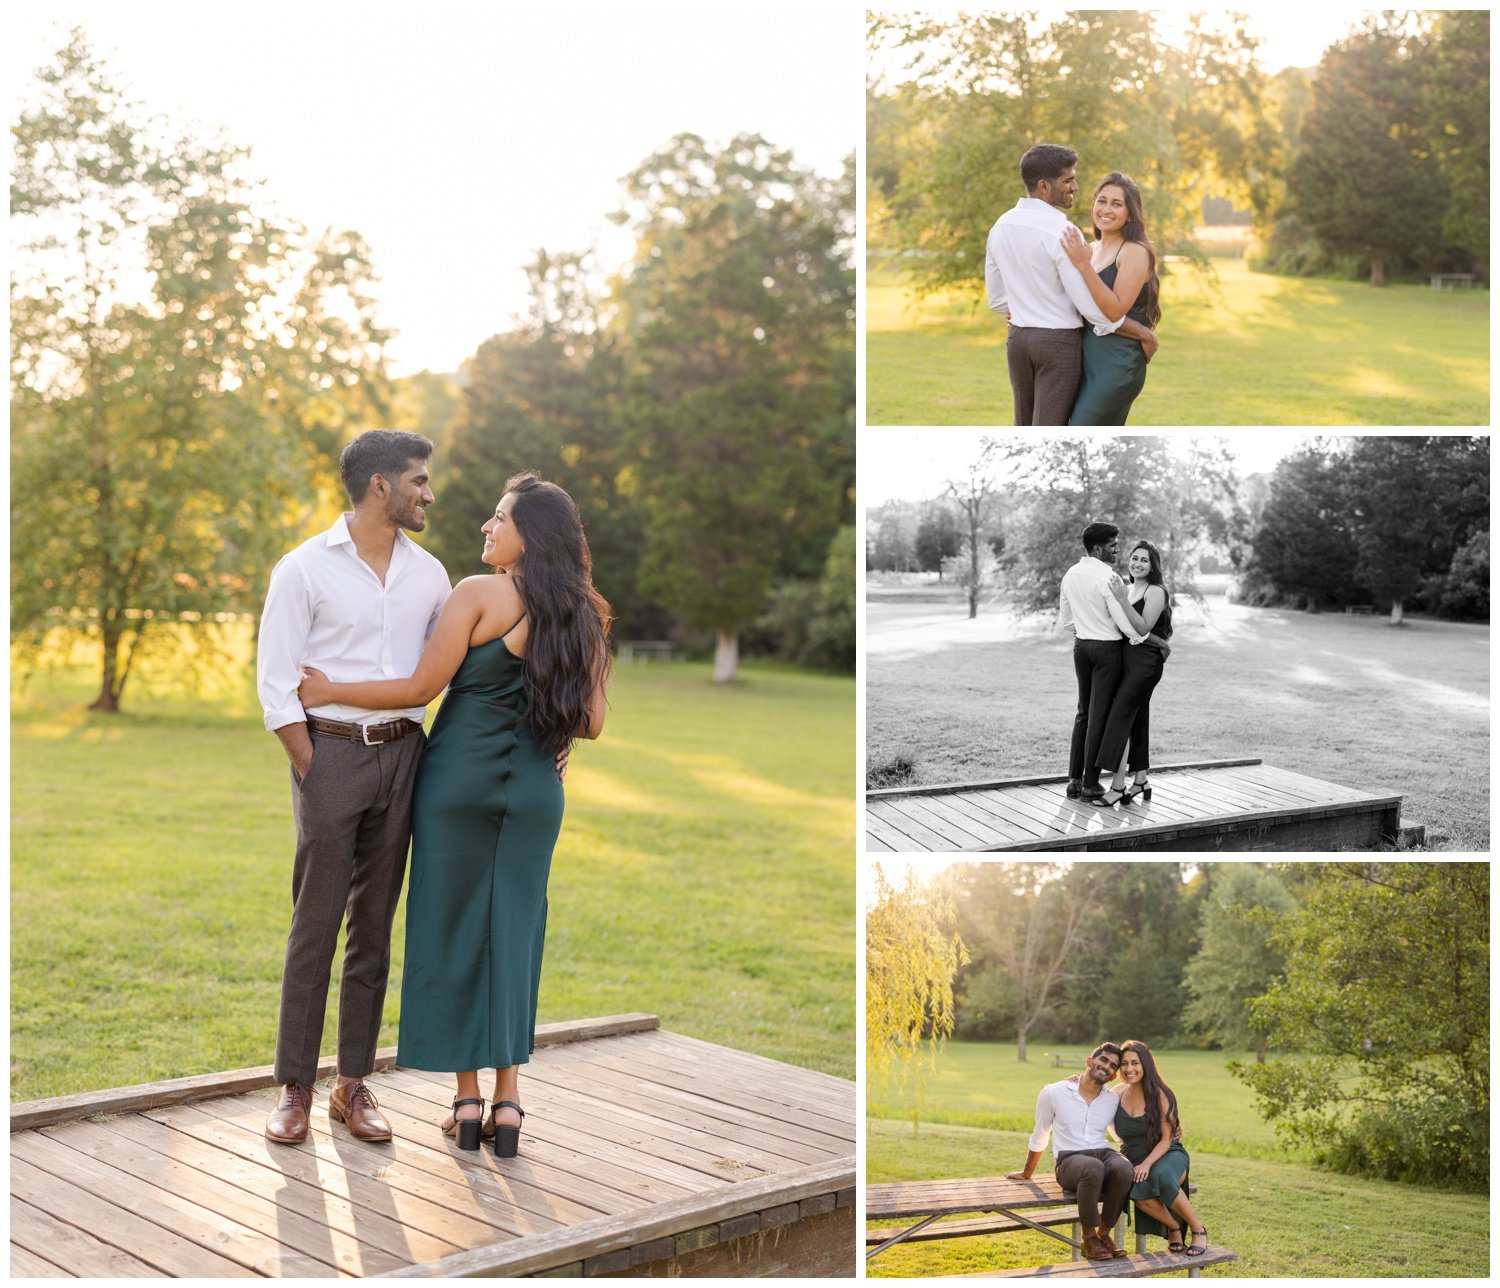 French-Creek-Park-PA-Summer-Lakeside-Engagement-Session-16.jpg